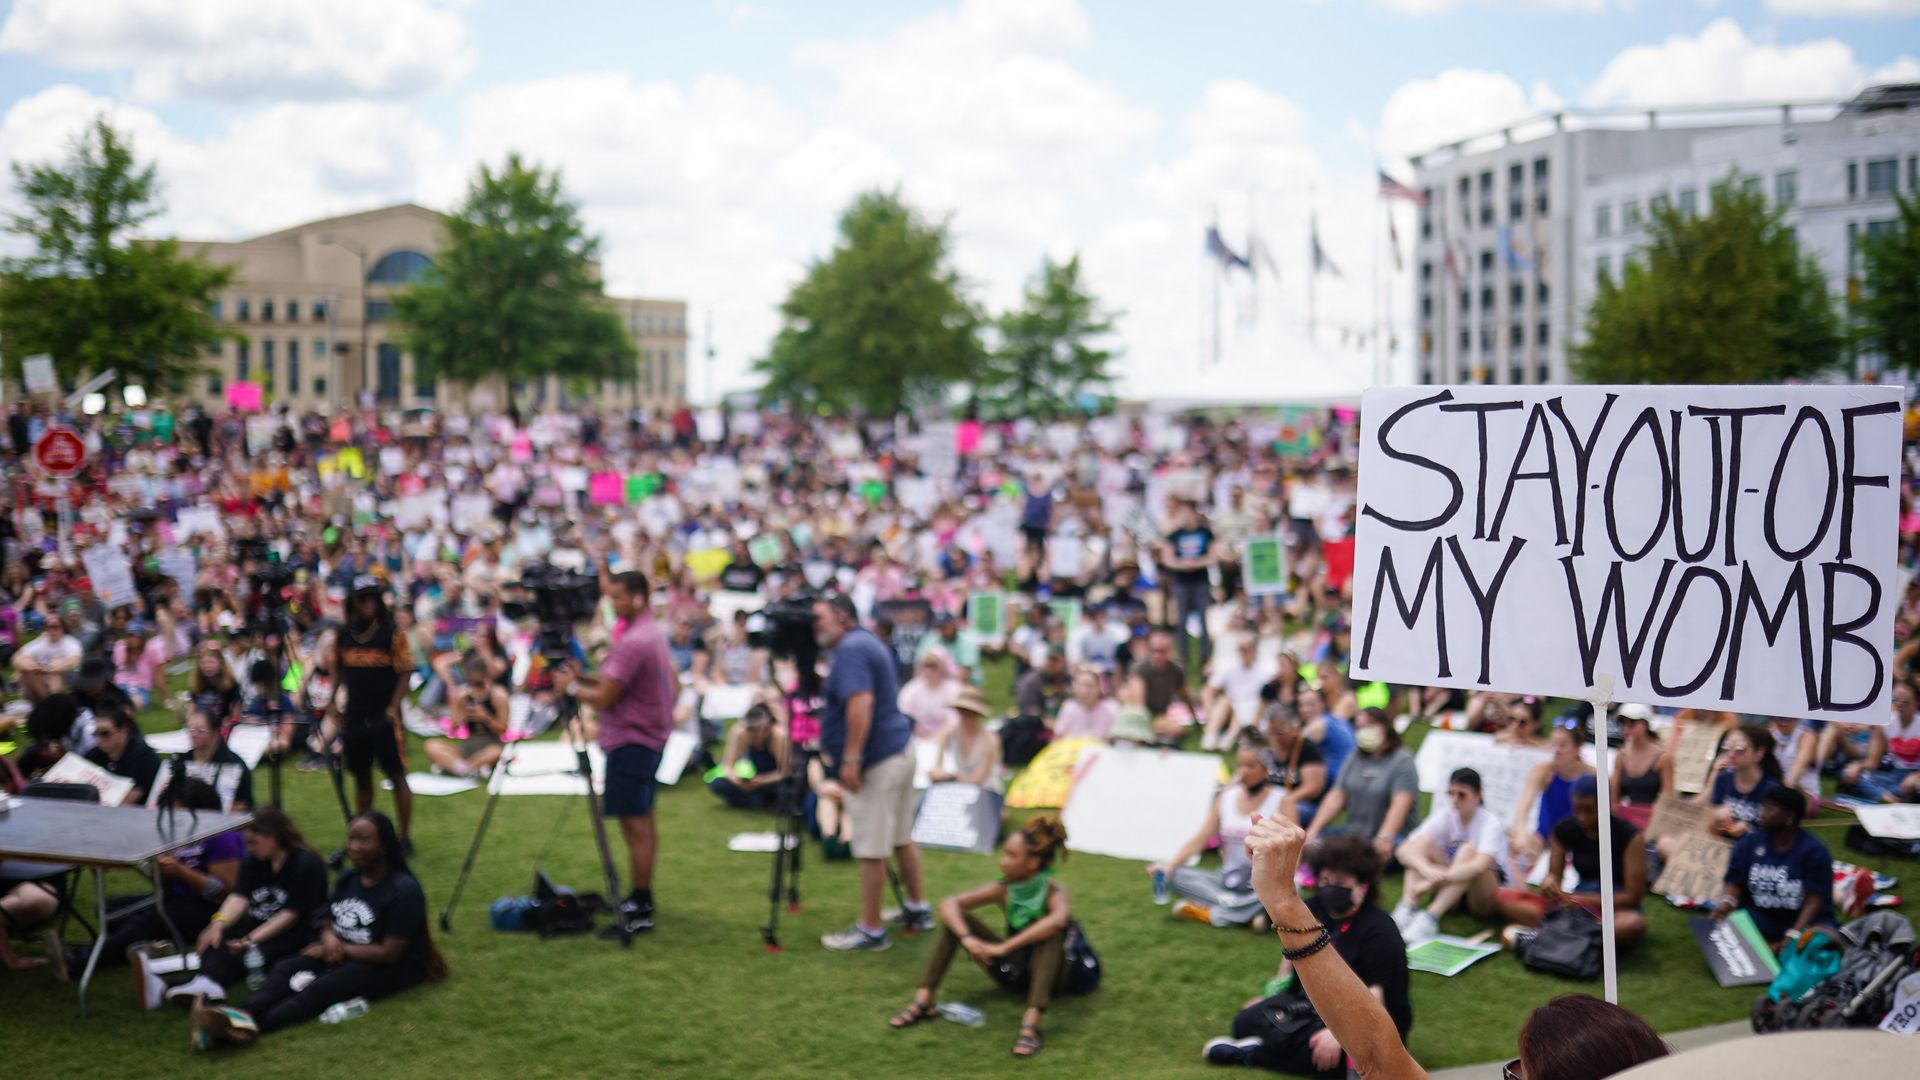 Photo of a sign that says "Stay out of my womb" against the backdrop of a crowd of protesters sitting on a green lawn